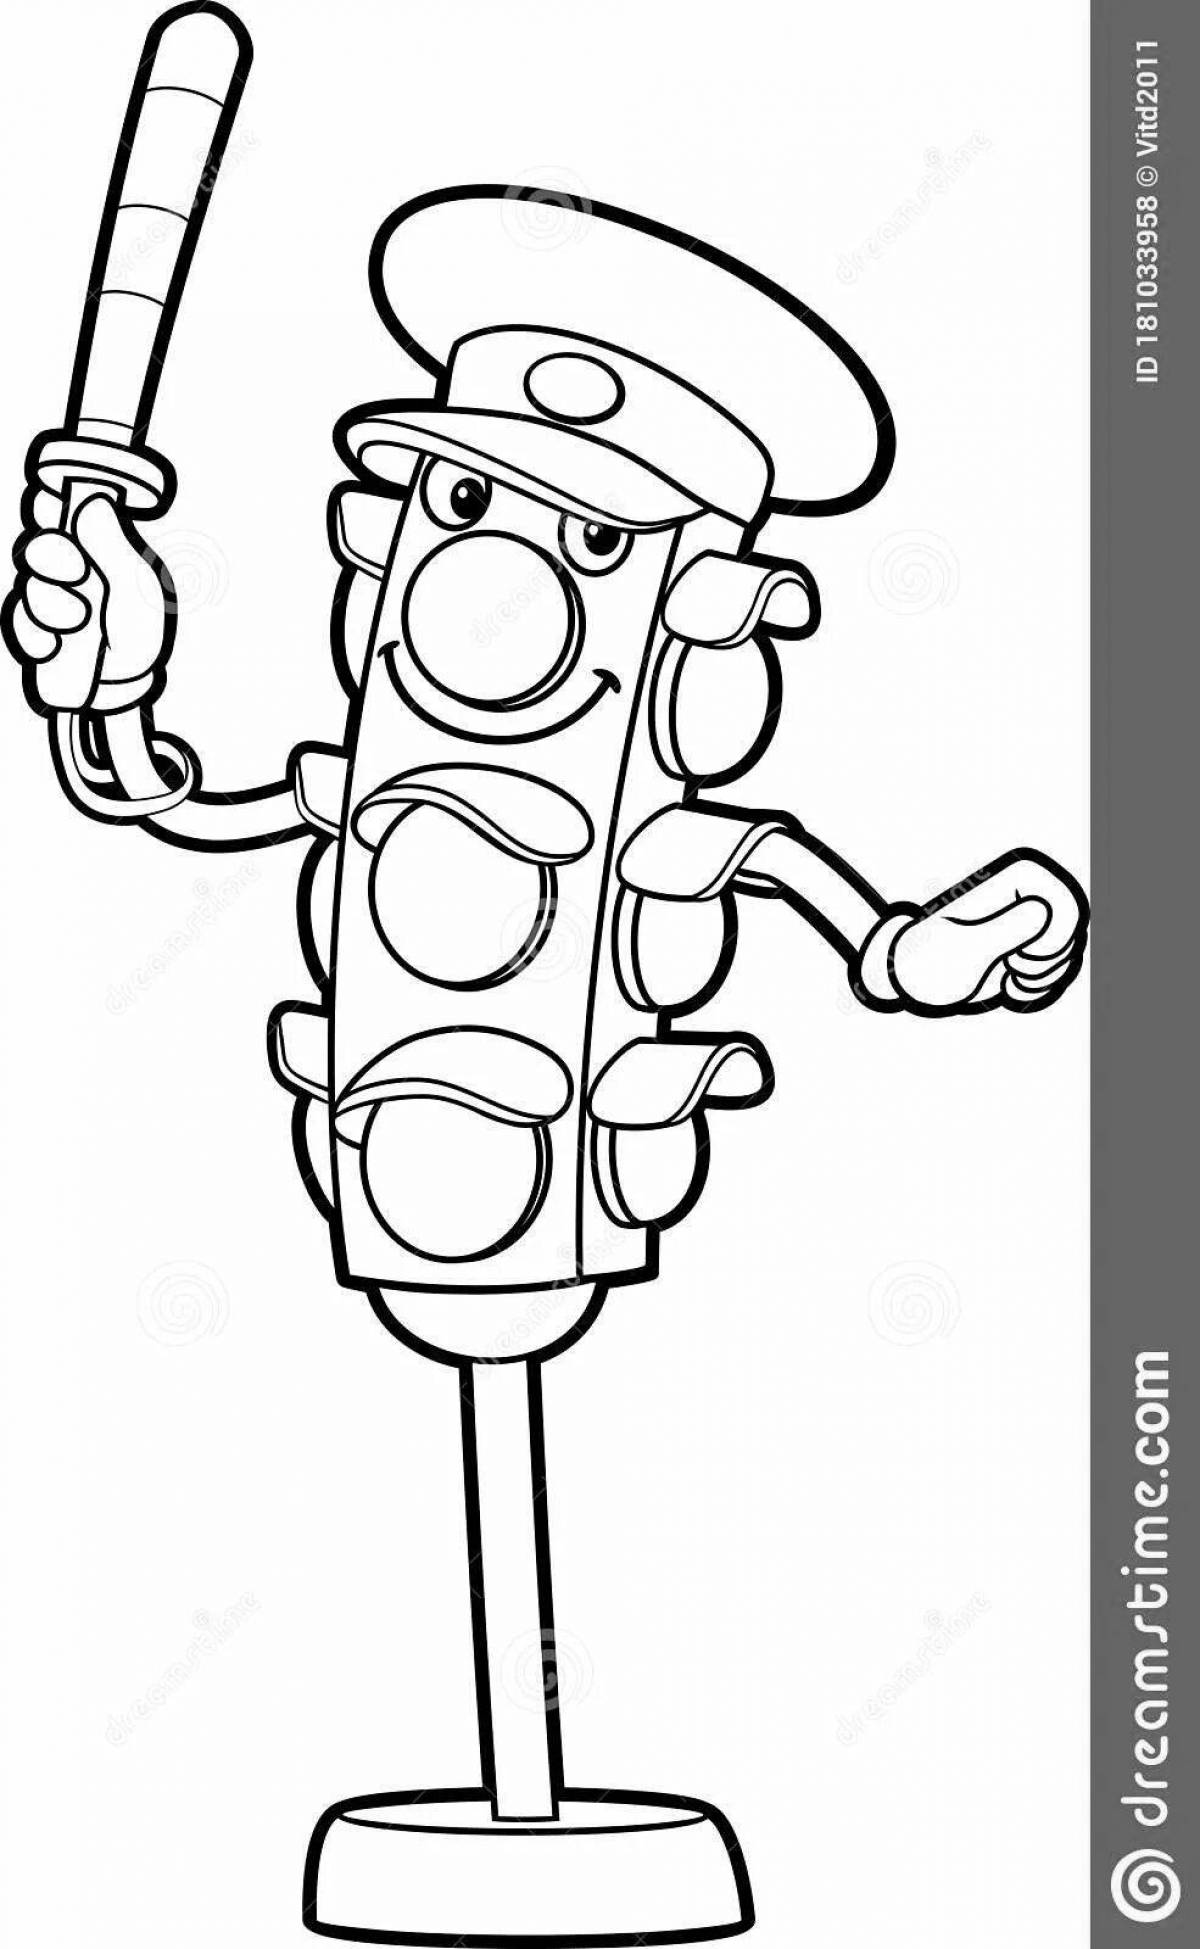 Adorable traffic light coloring page for kids